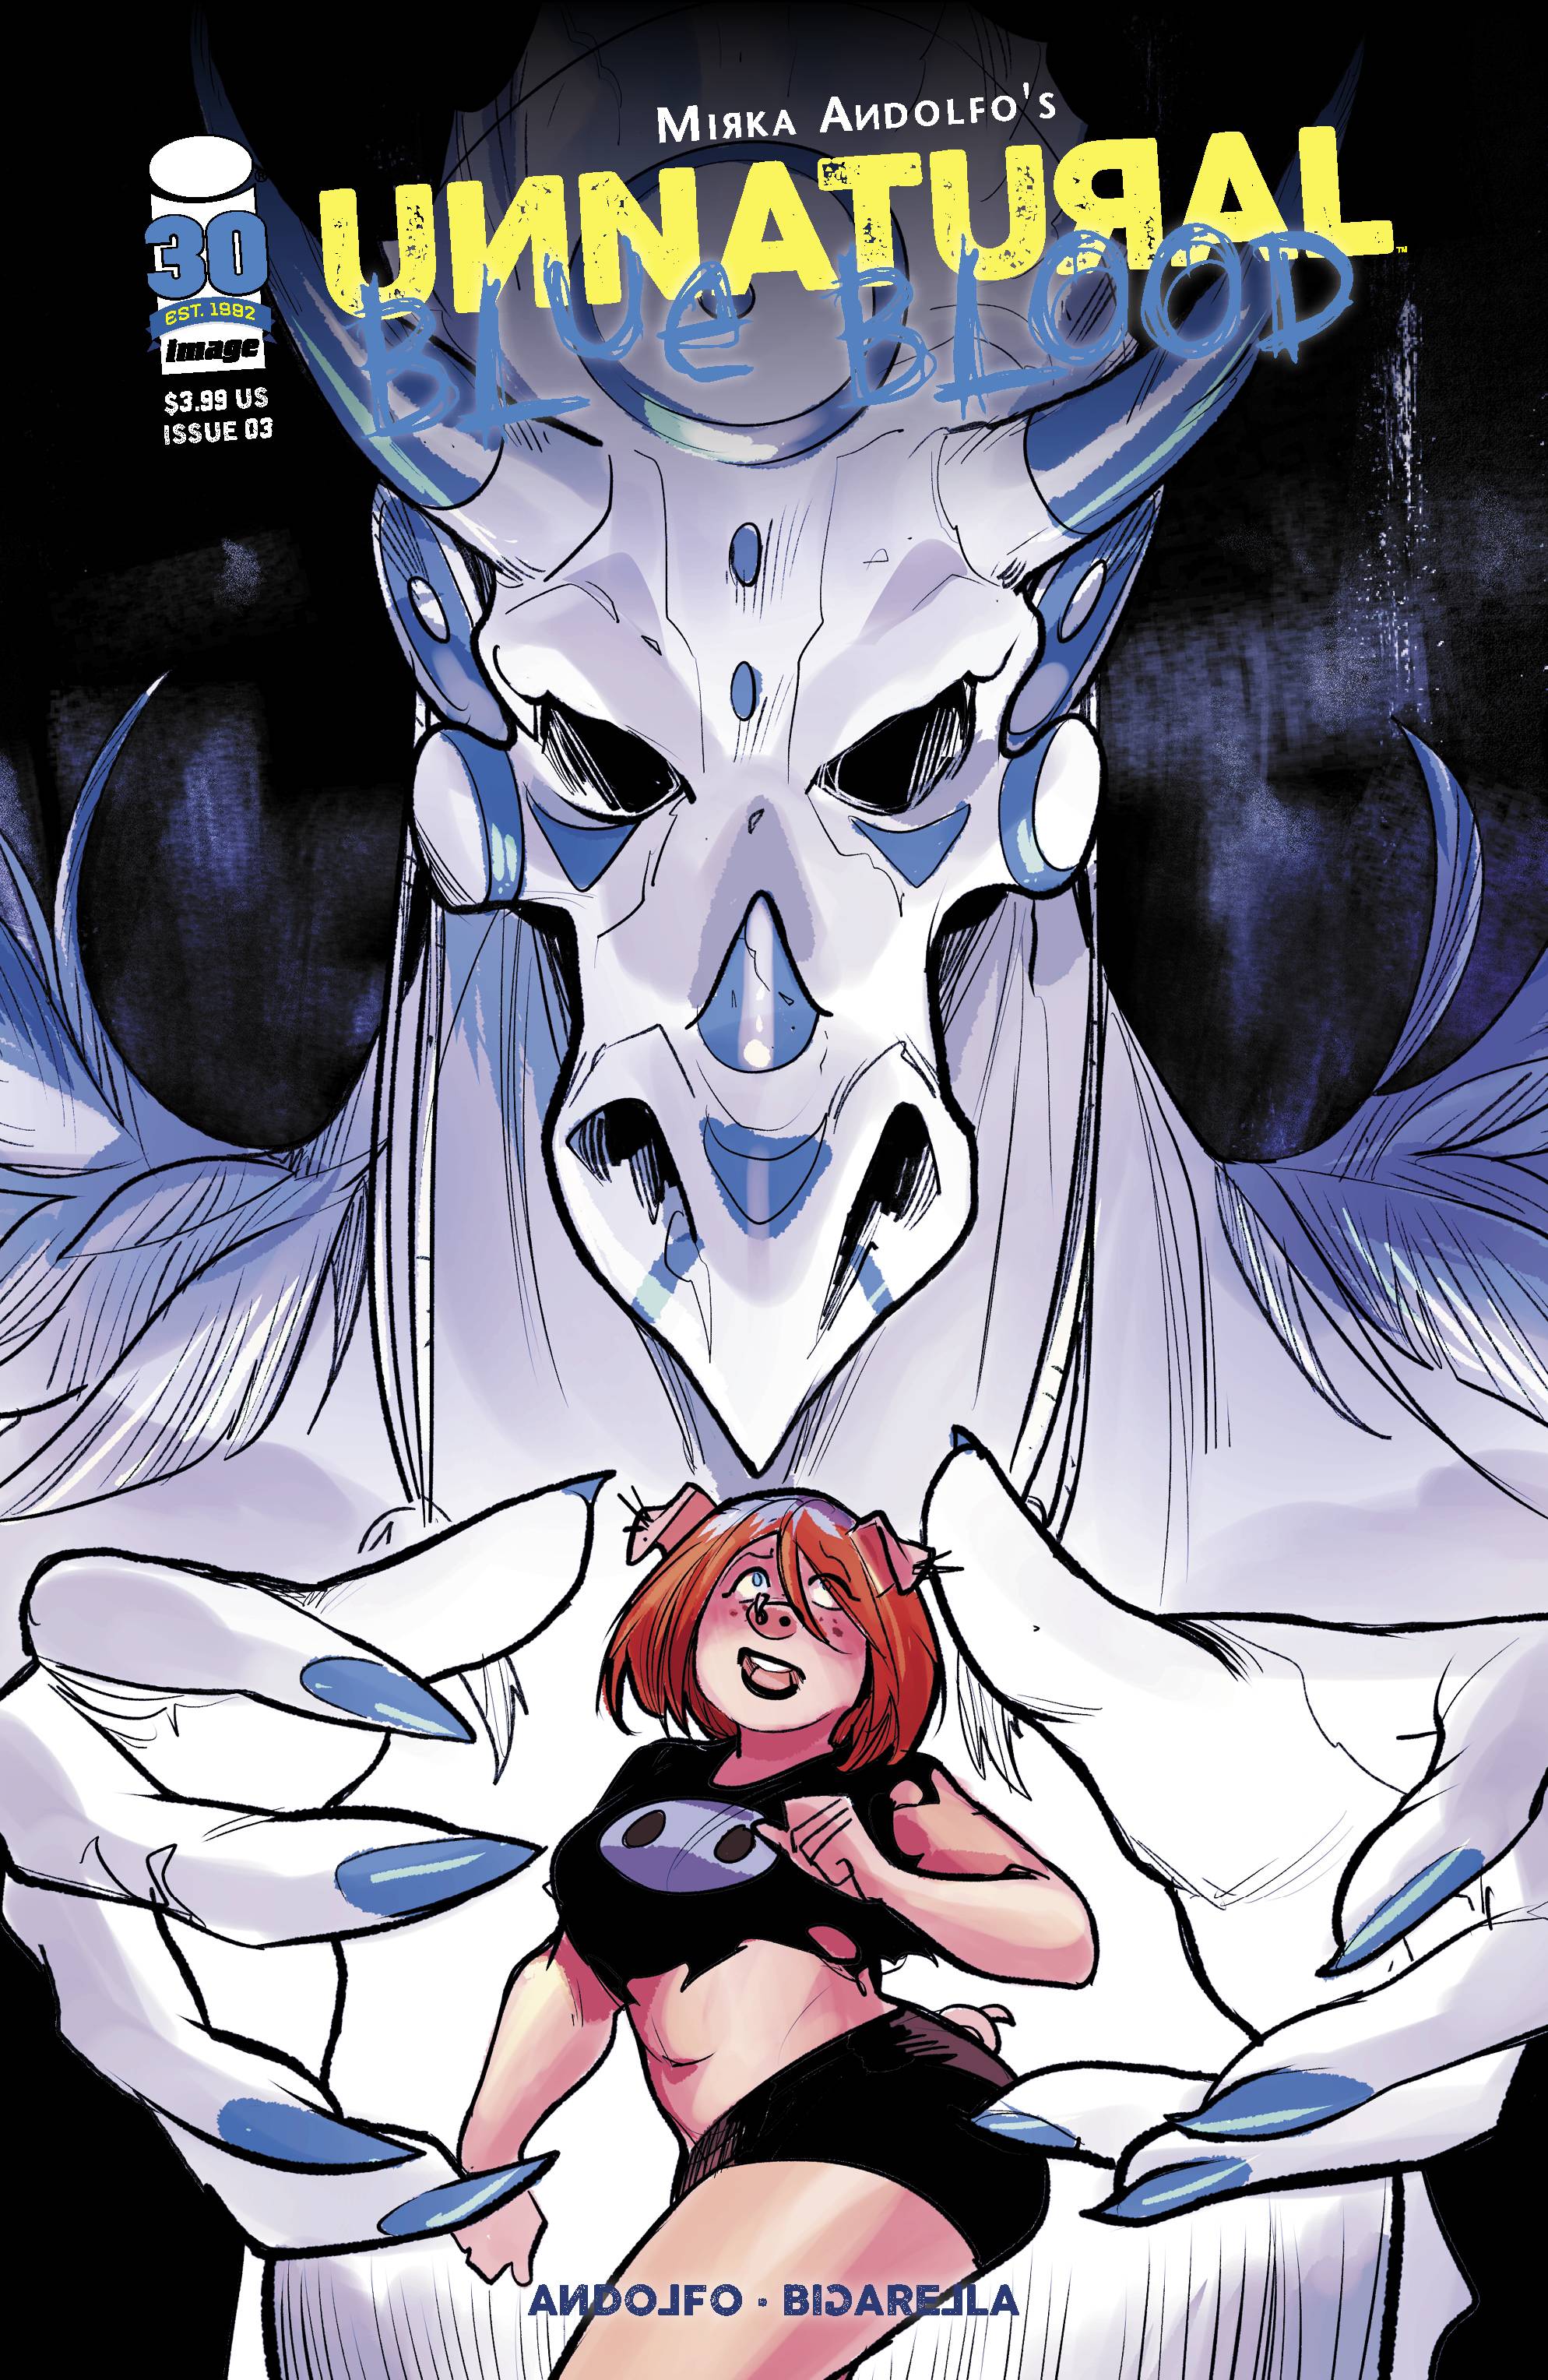 Unnatural Blue Blood #3 Cover A Andolfo (Of 10) (Mature)